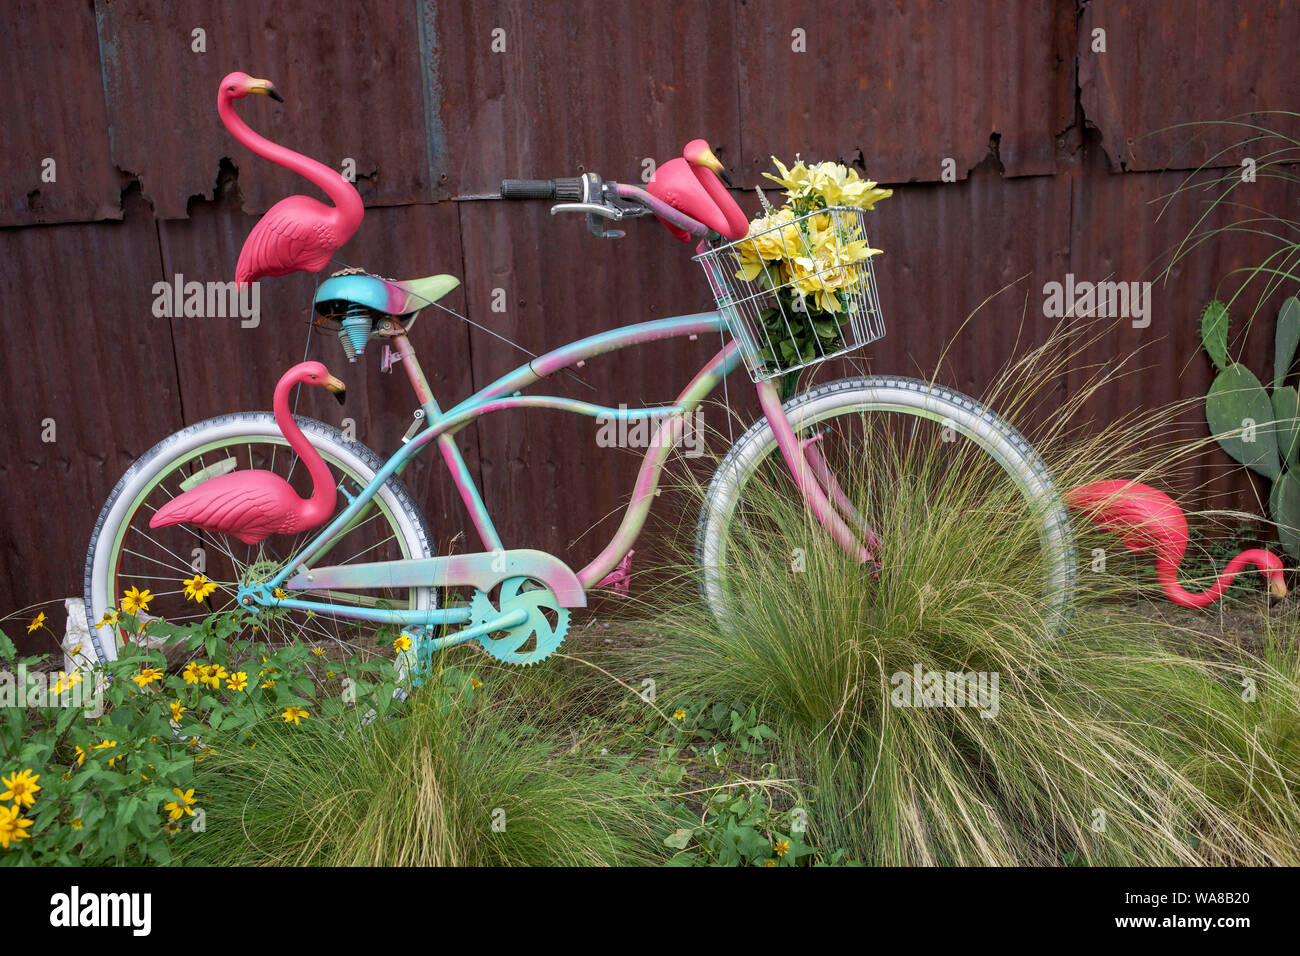 Painted bicycle and Made in China flamingos on display in a street of Alpine, West Texas Stock Photo